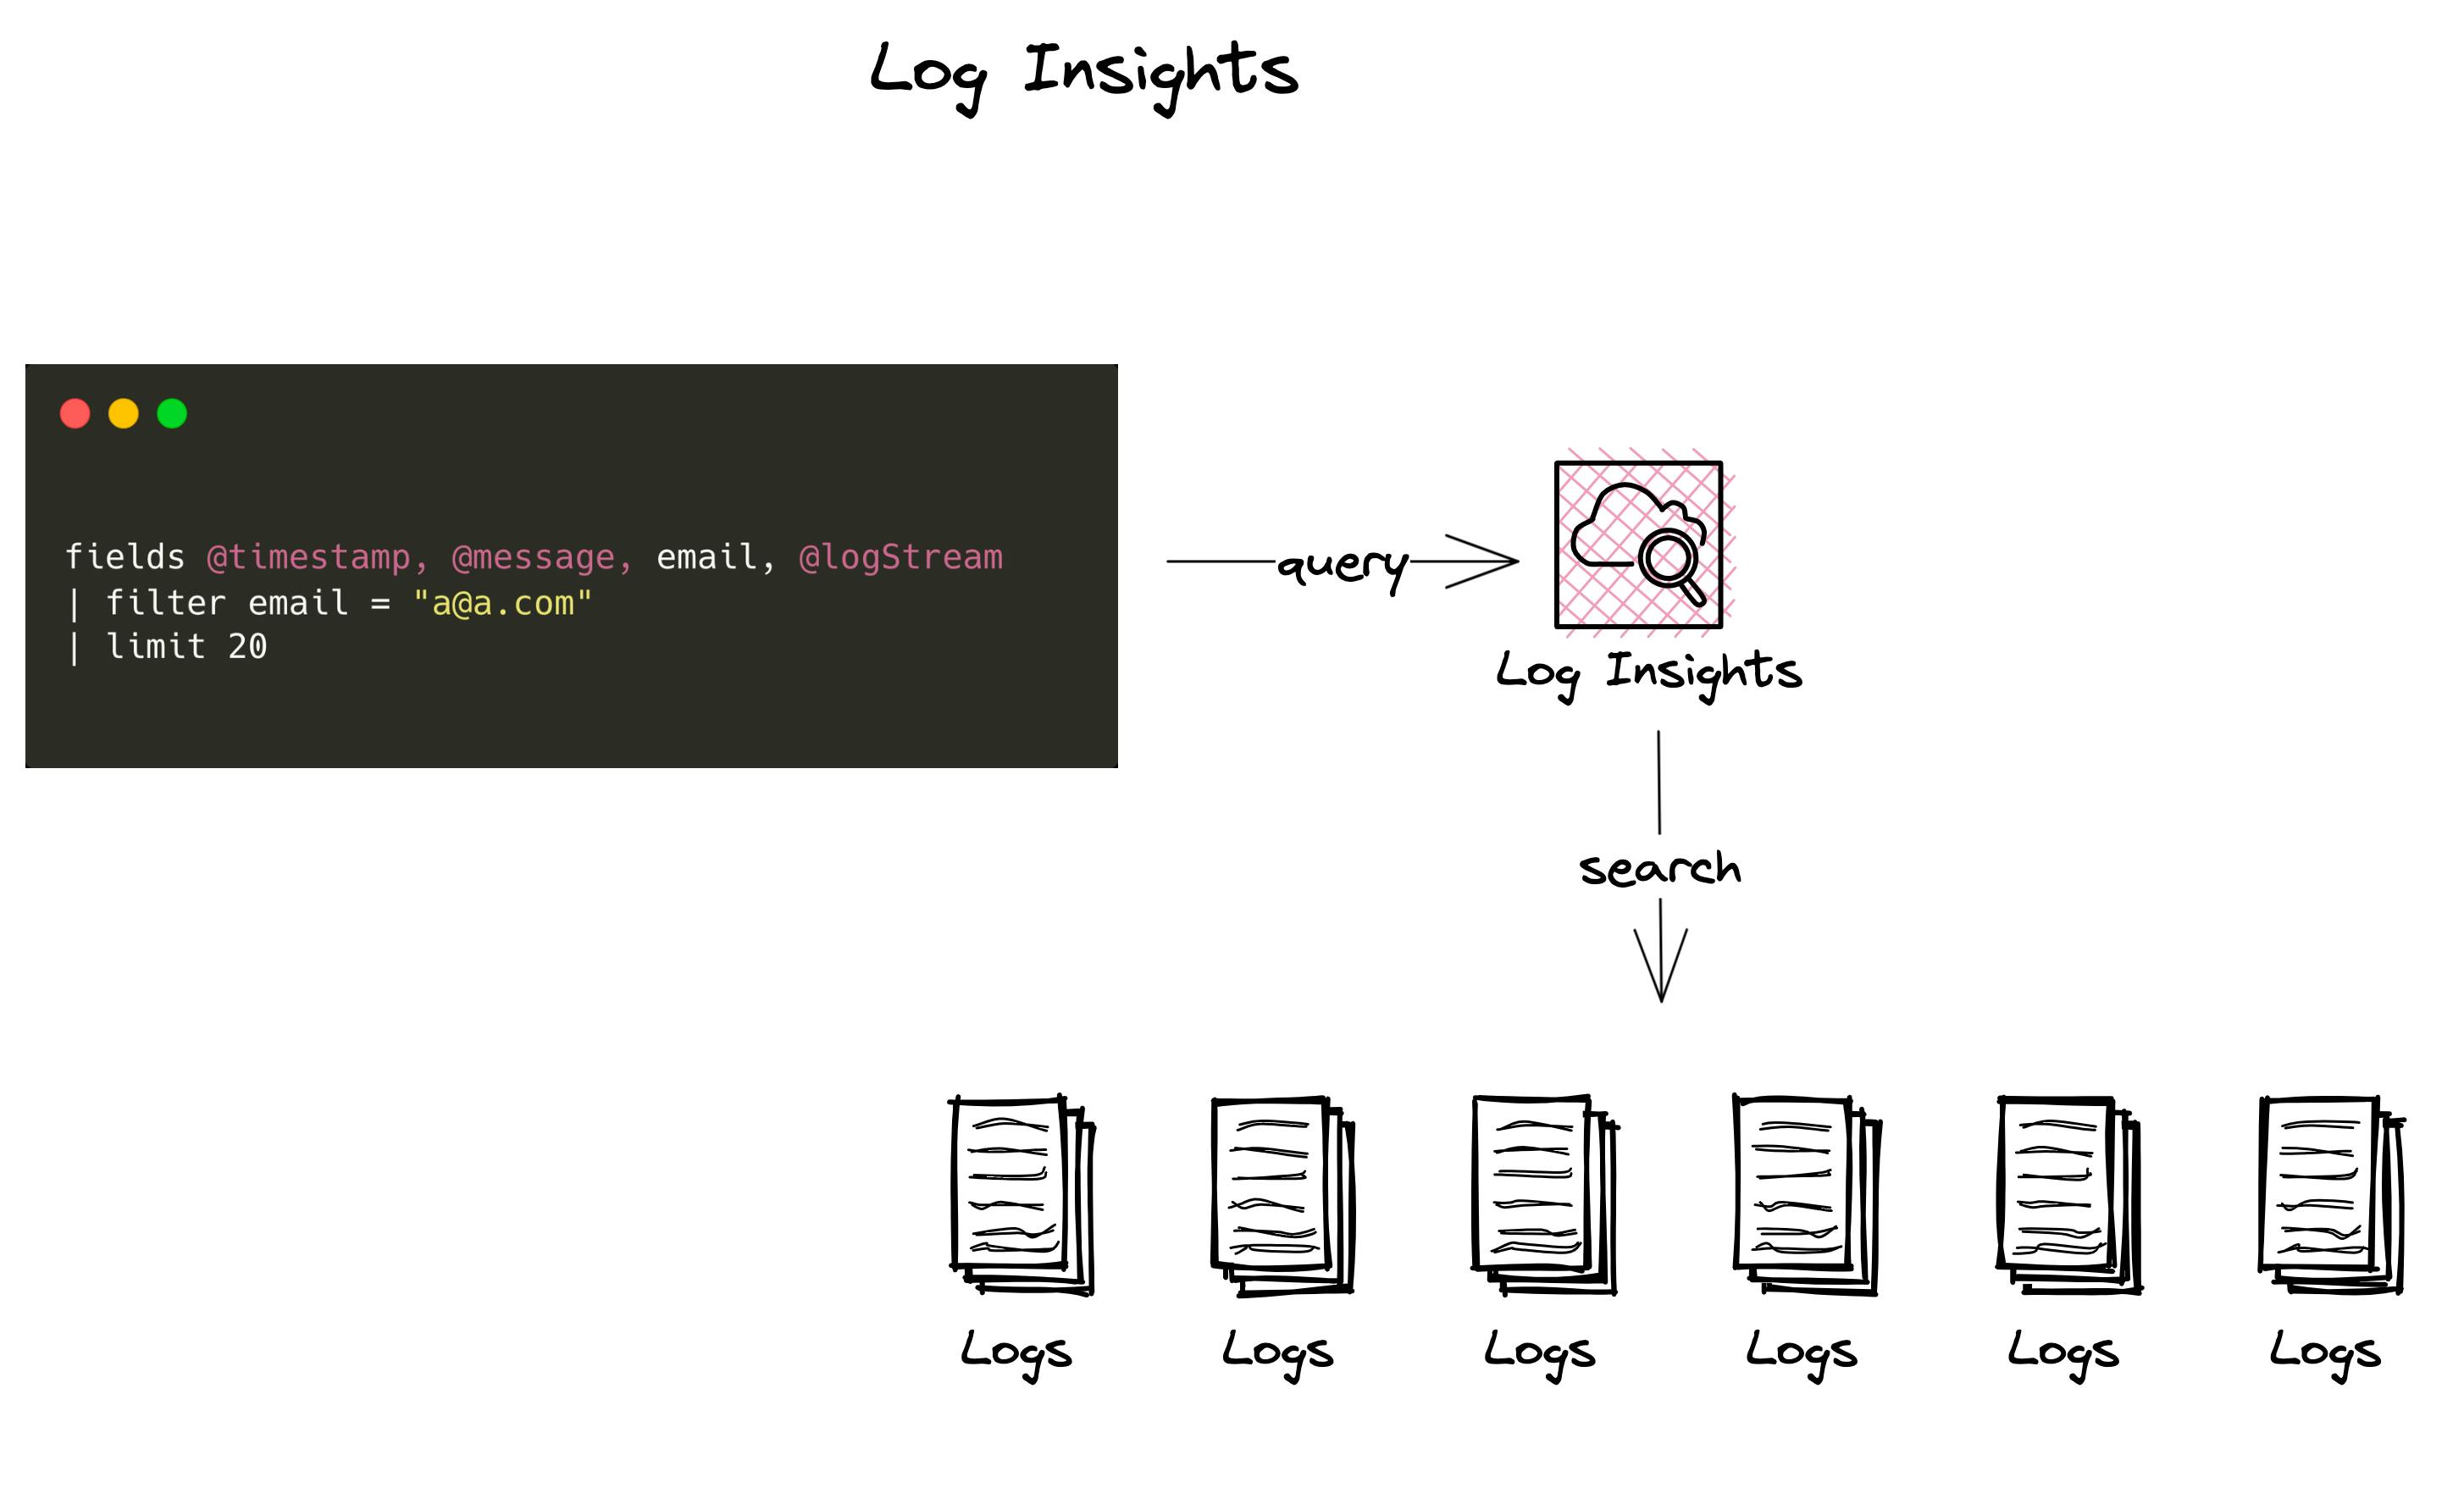 CloudWatch Insights querying multiple log groups